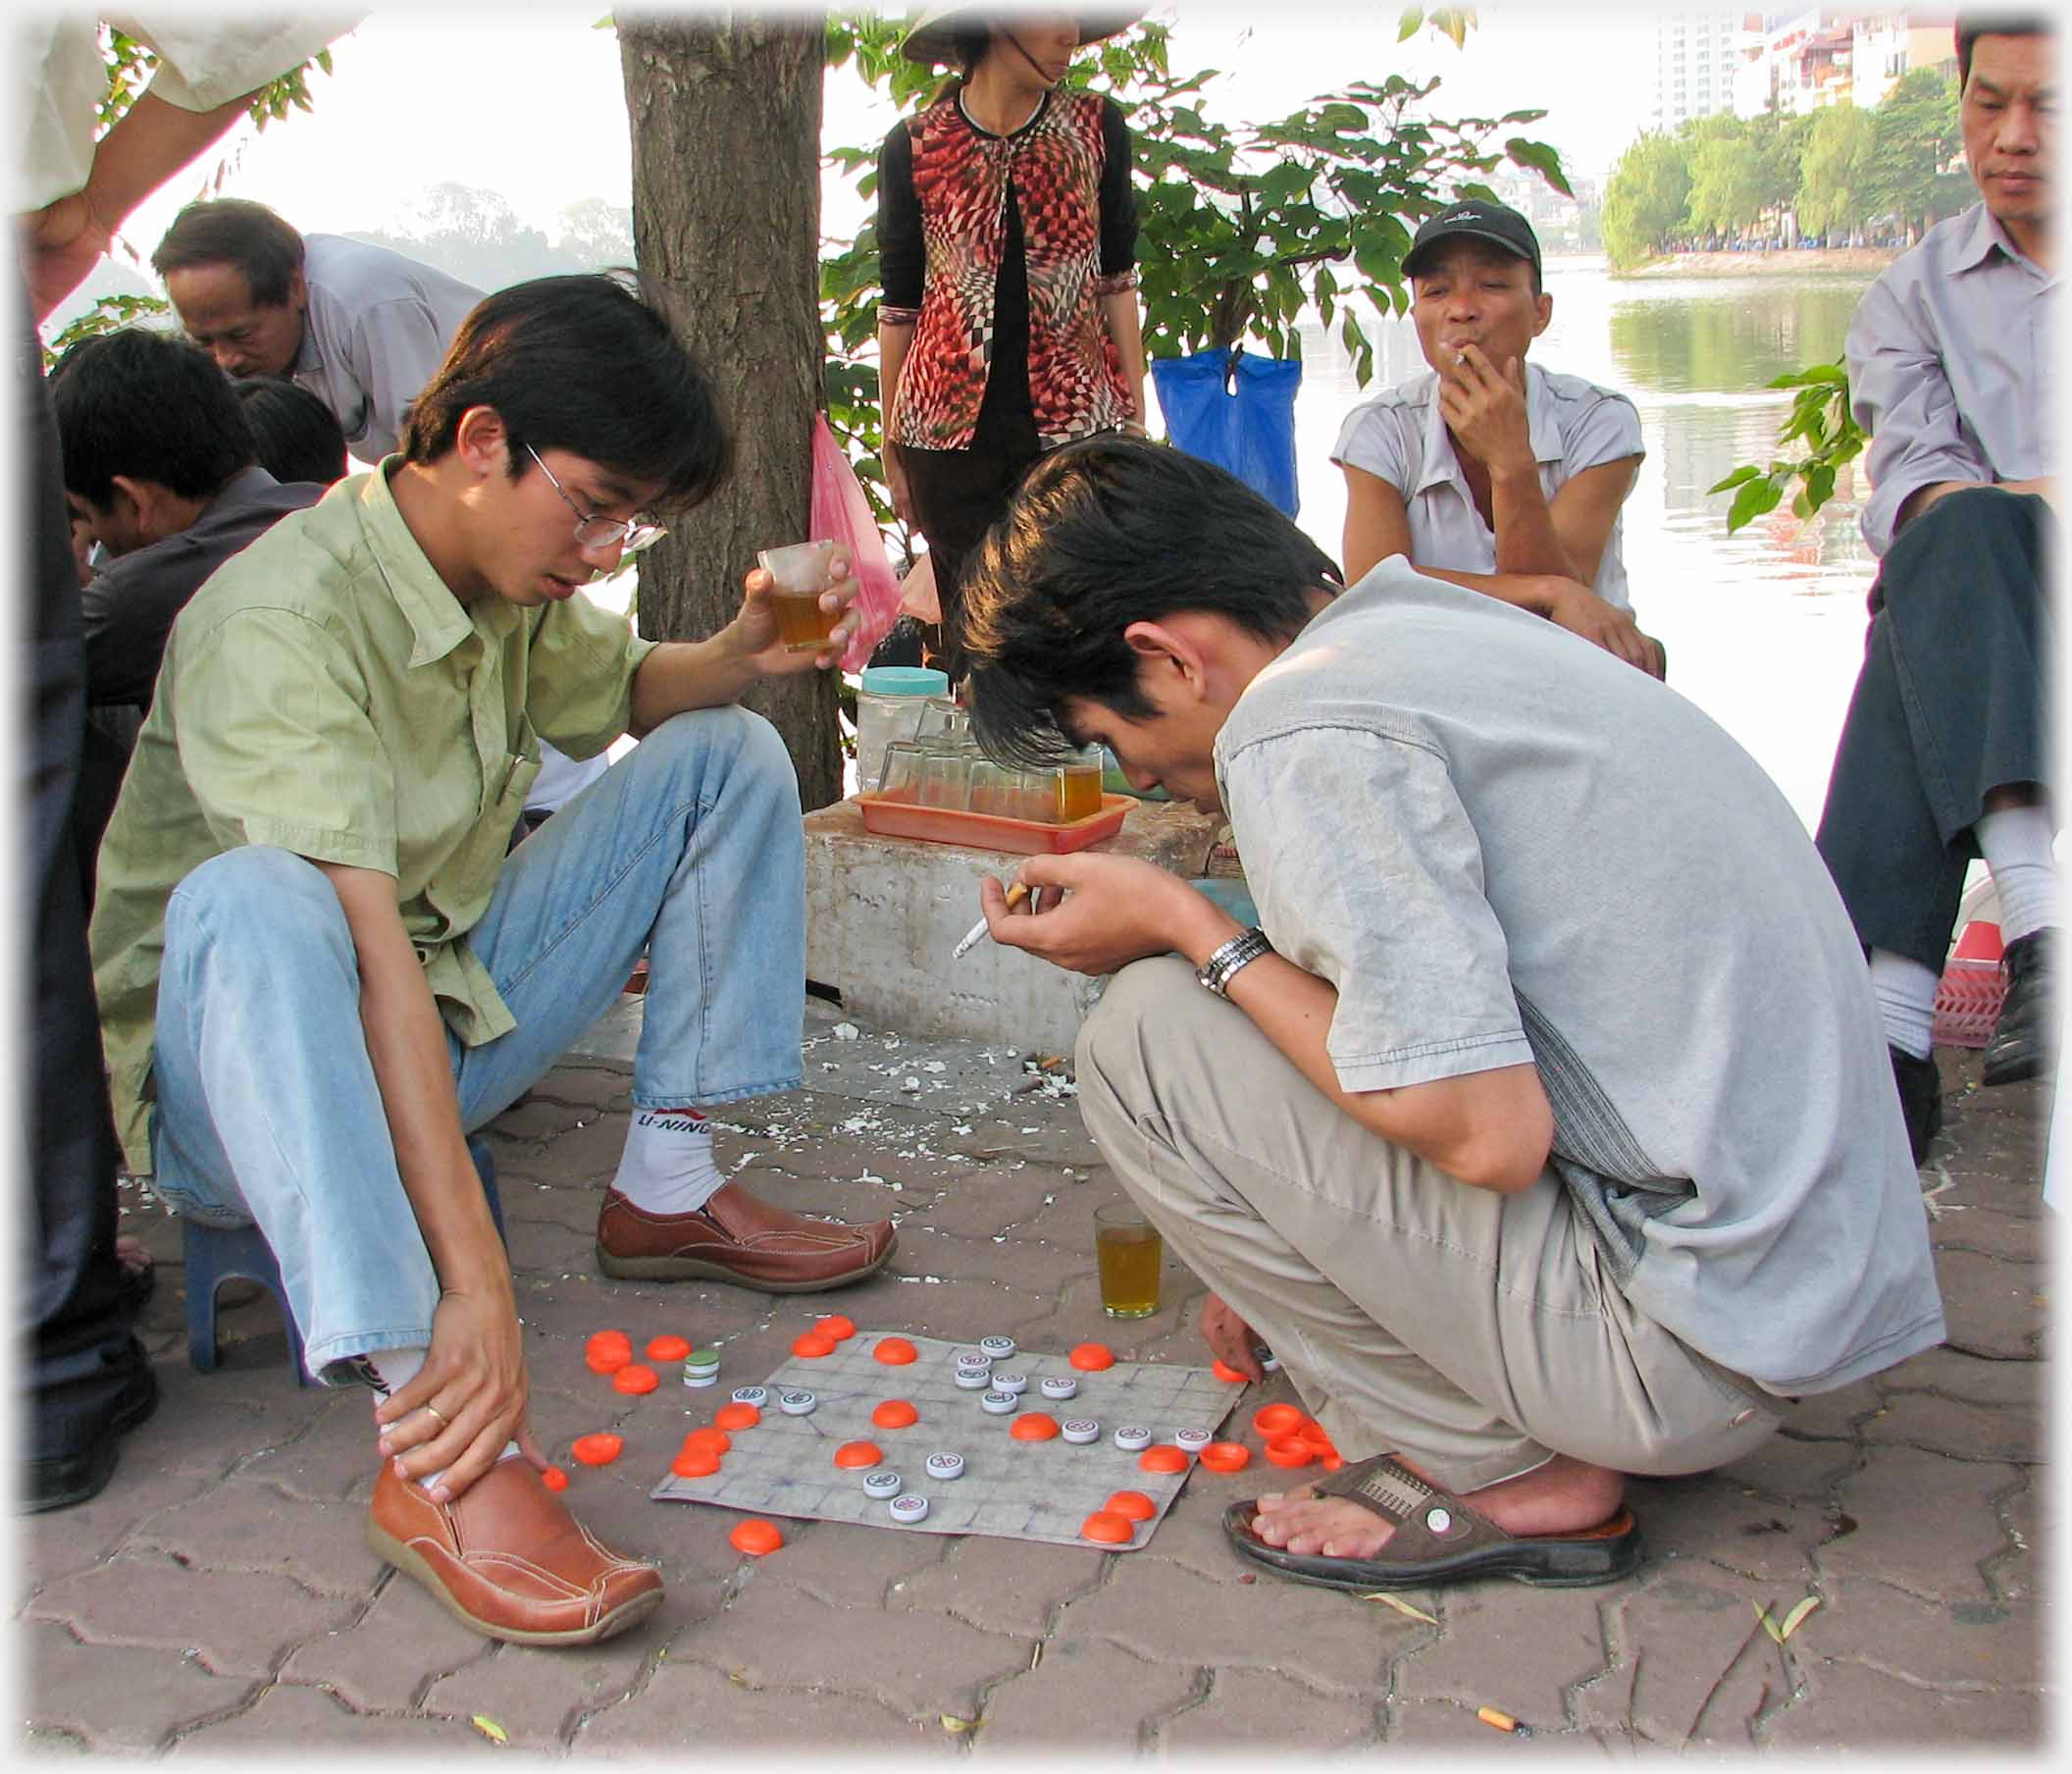 Two men, one with tea and one with cigarette are playing, watched from further off by two men, woman selling tea looking away.